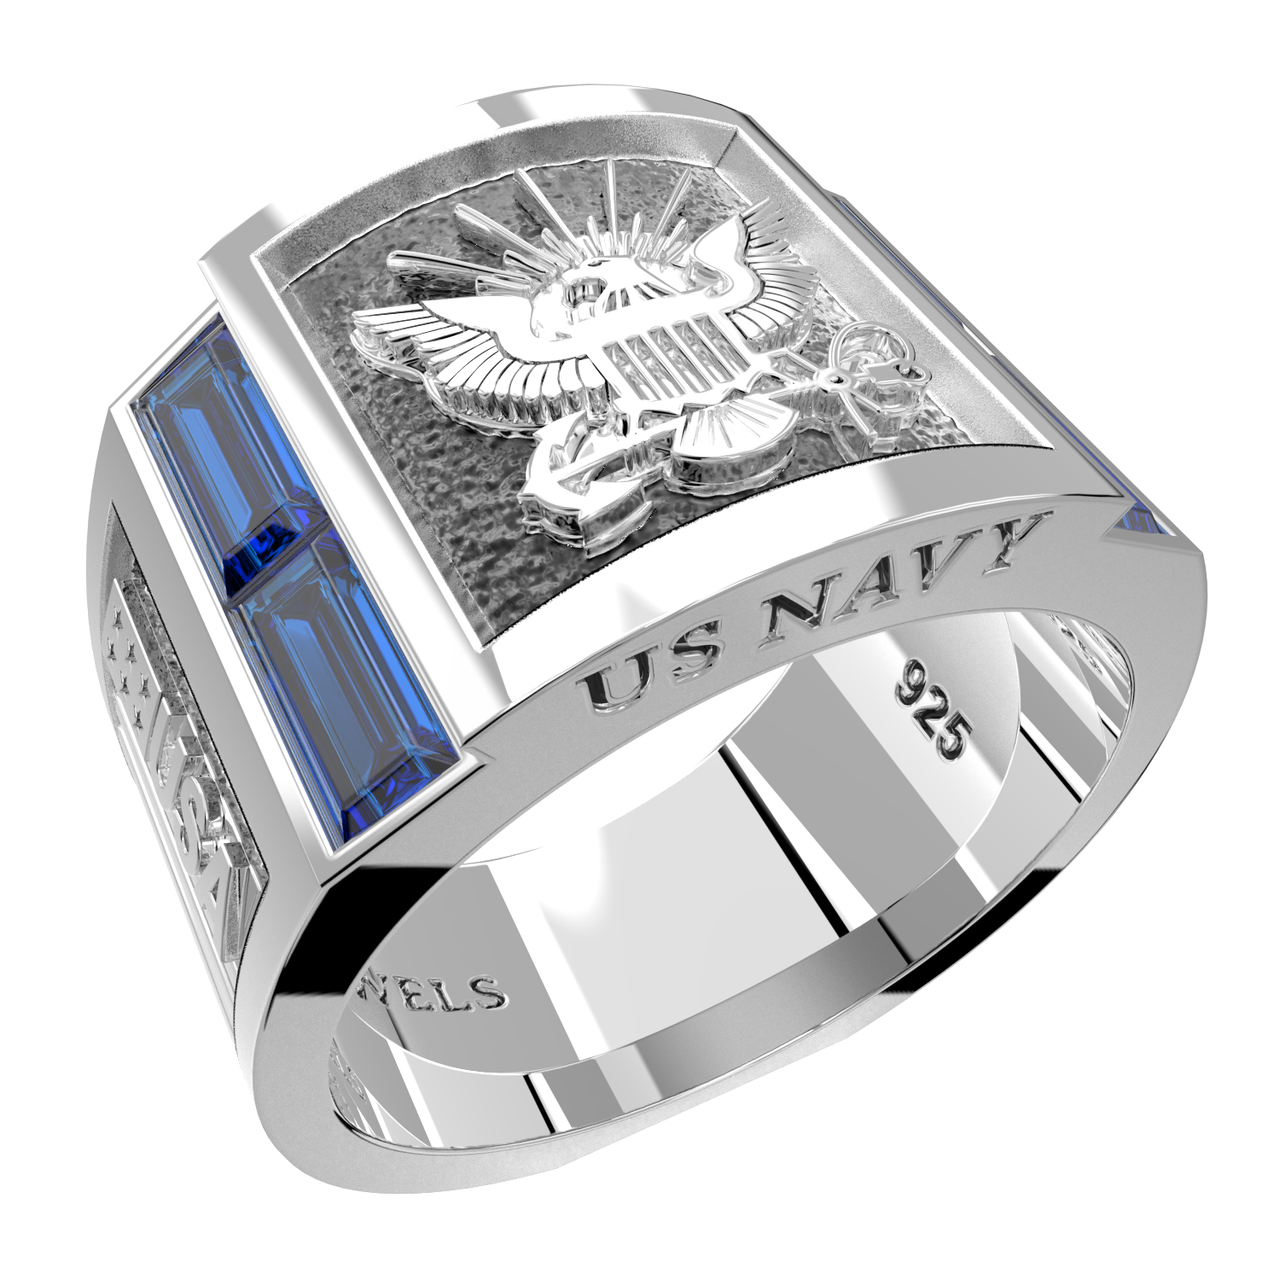 Men's Heavy 925 Sterling Silver US Navy Ring Band w/ Synthetic Sapphires